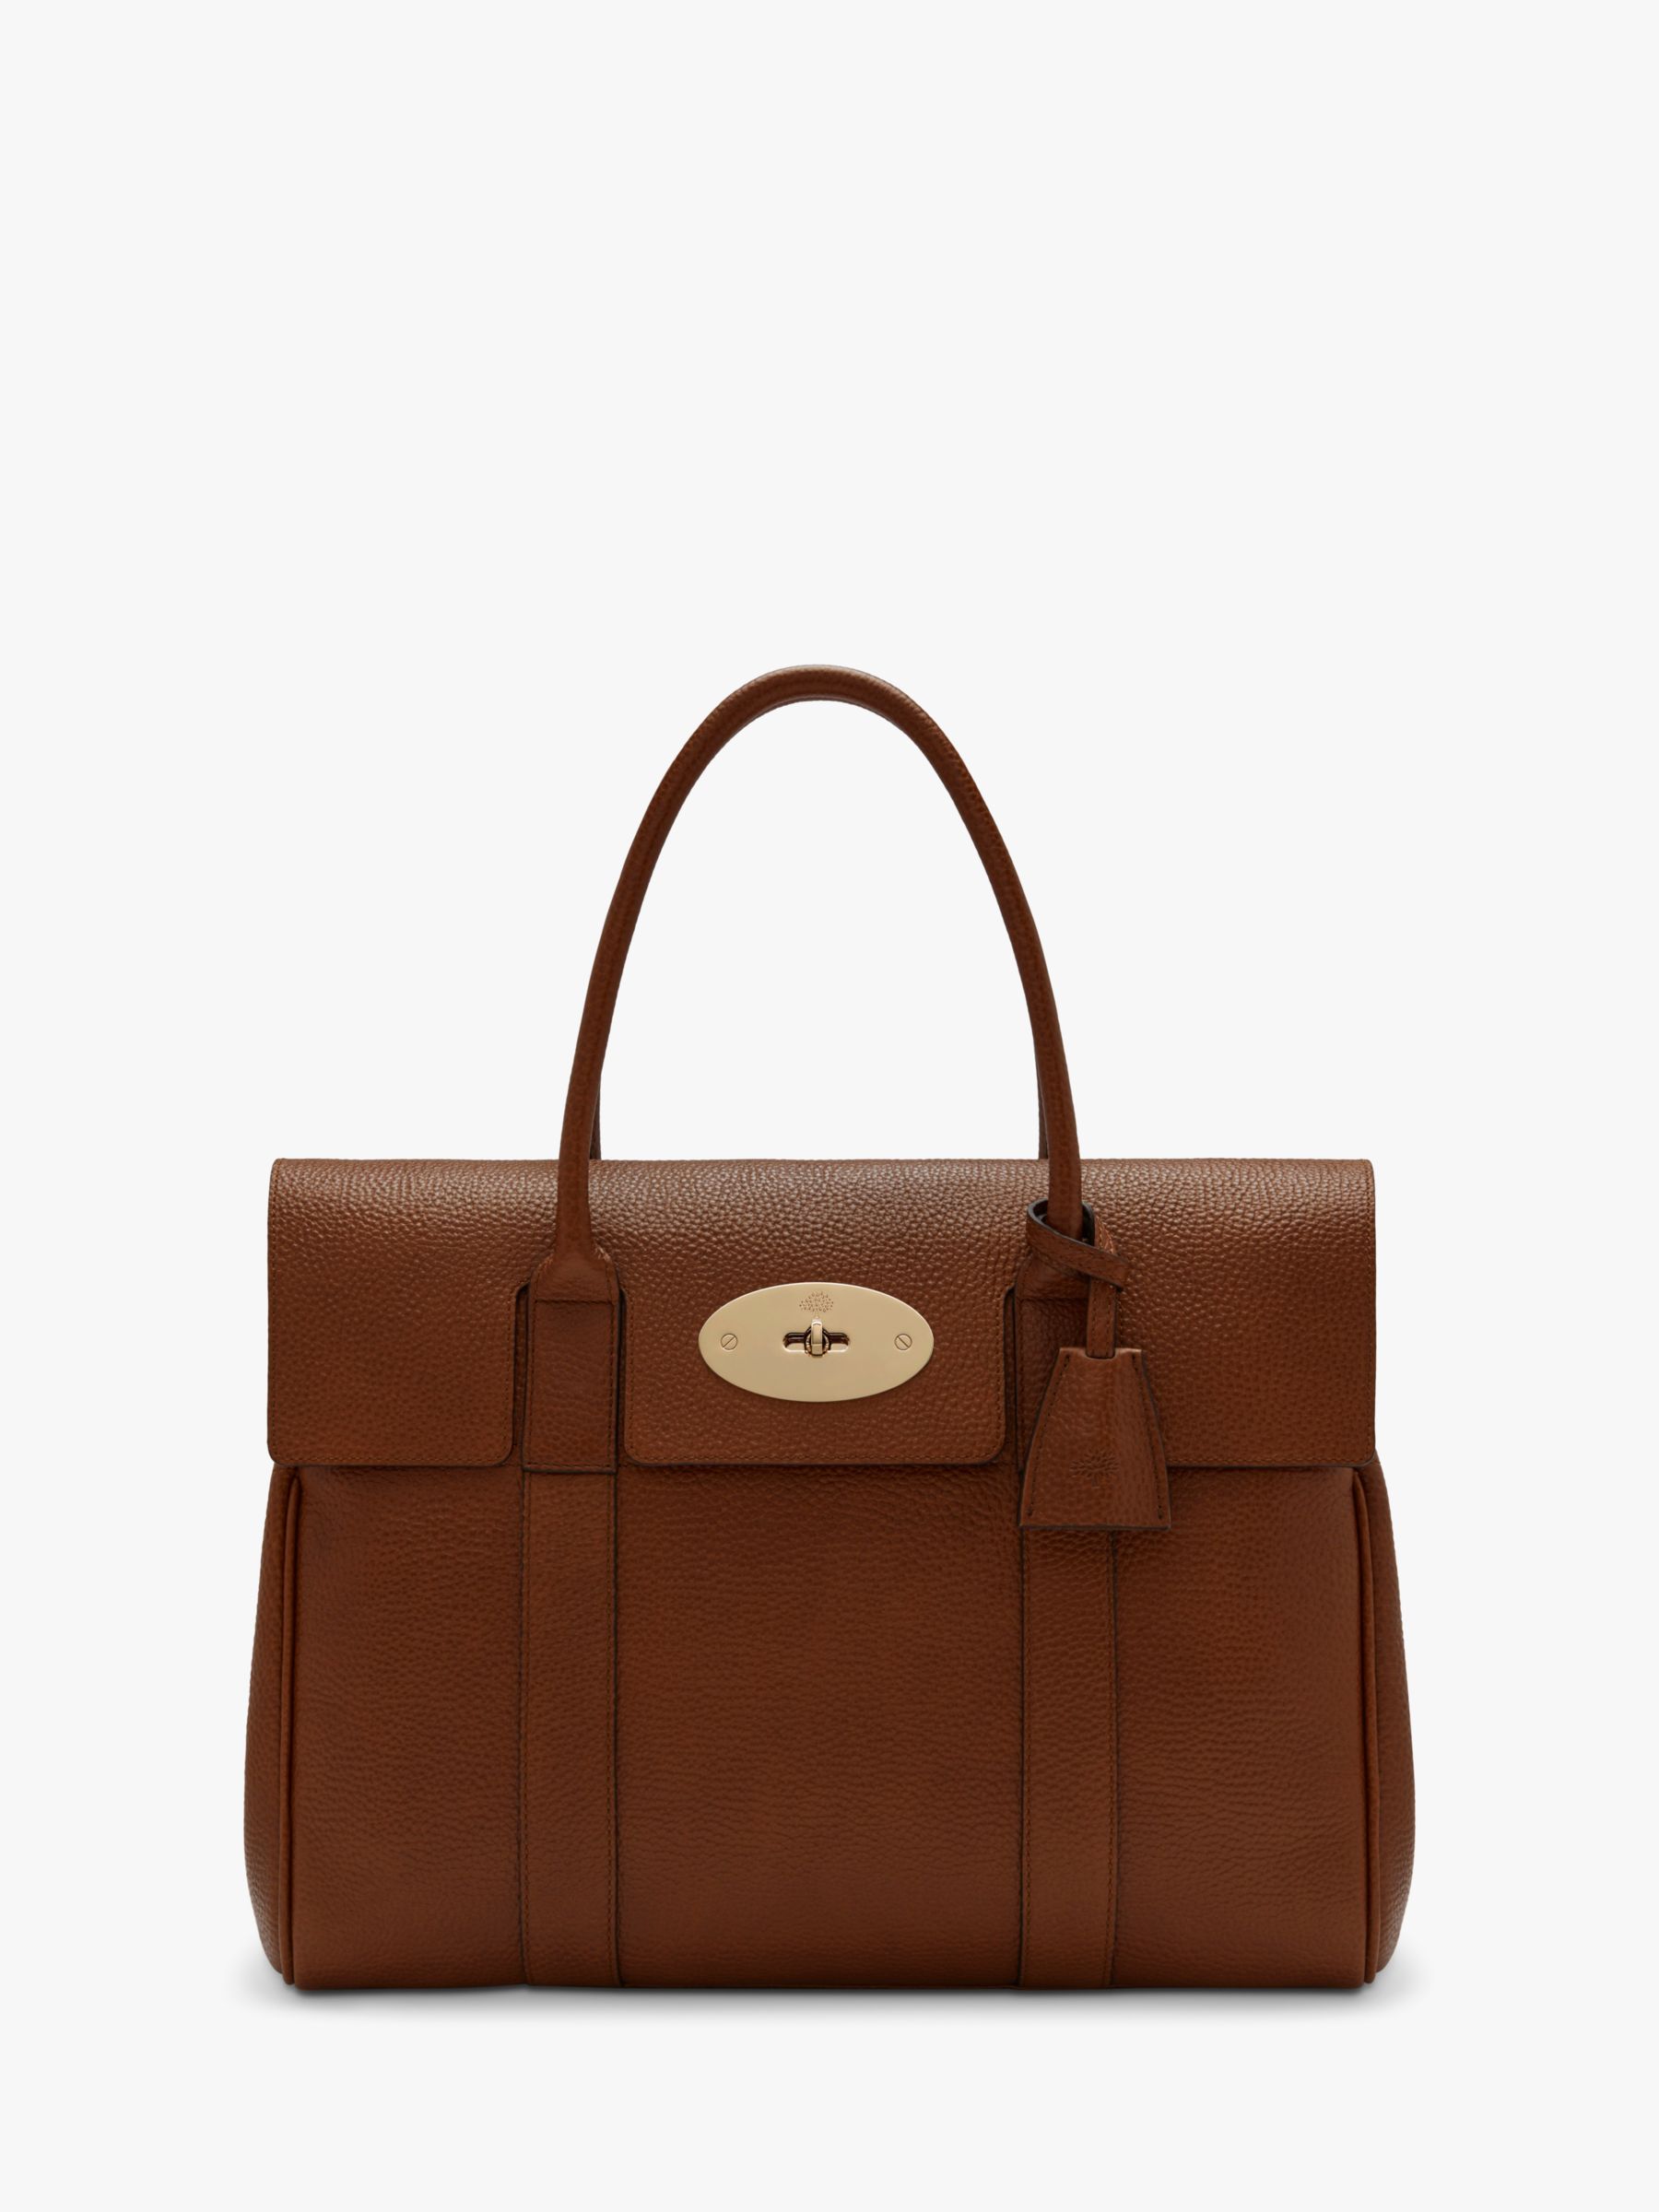 Mulberry Bayswater Grained Leather Bag OS Brown Leather